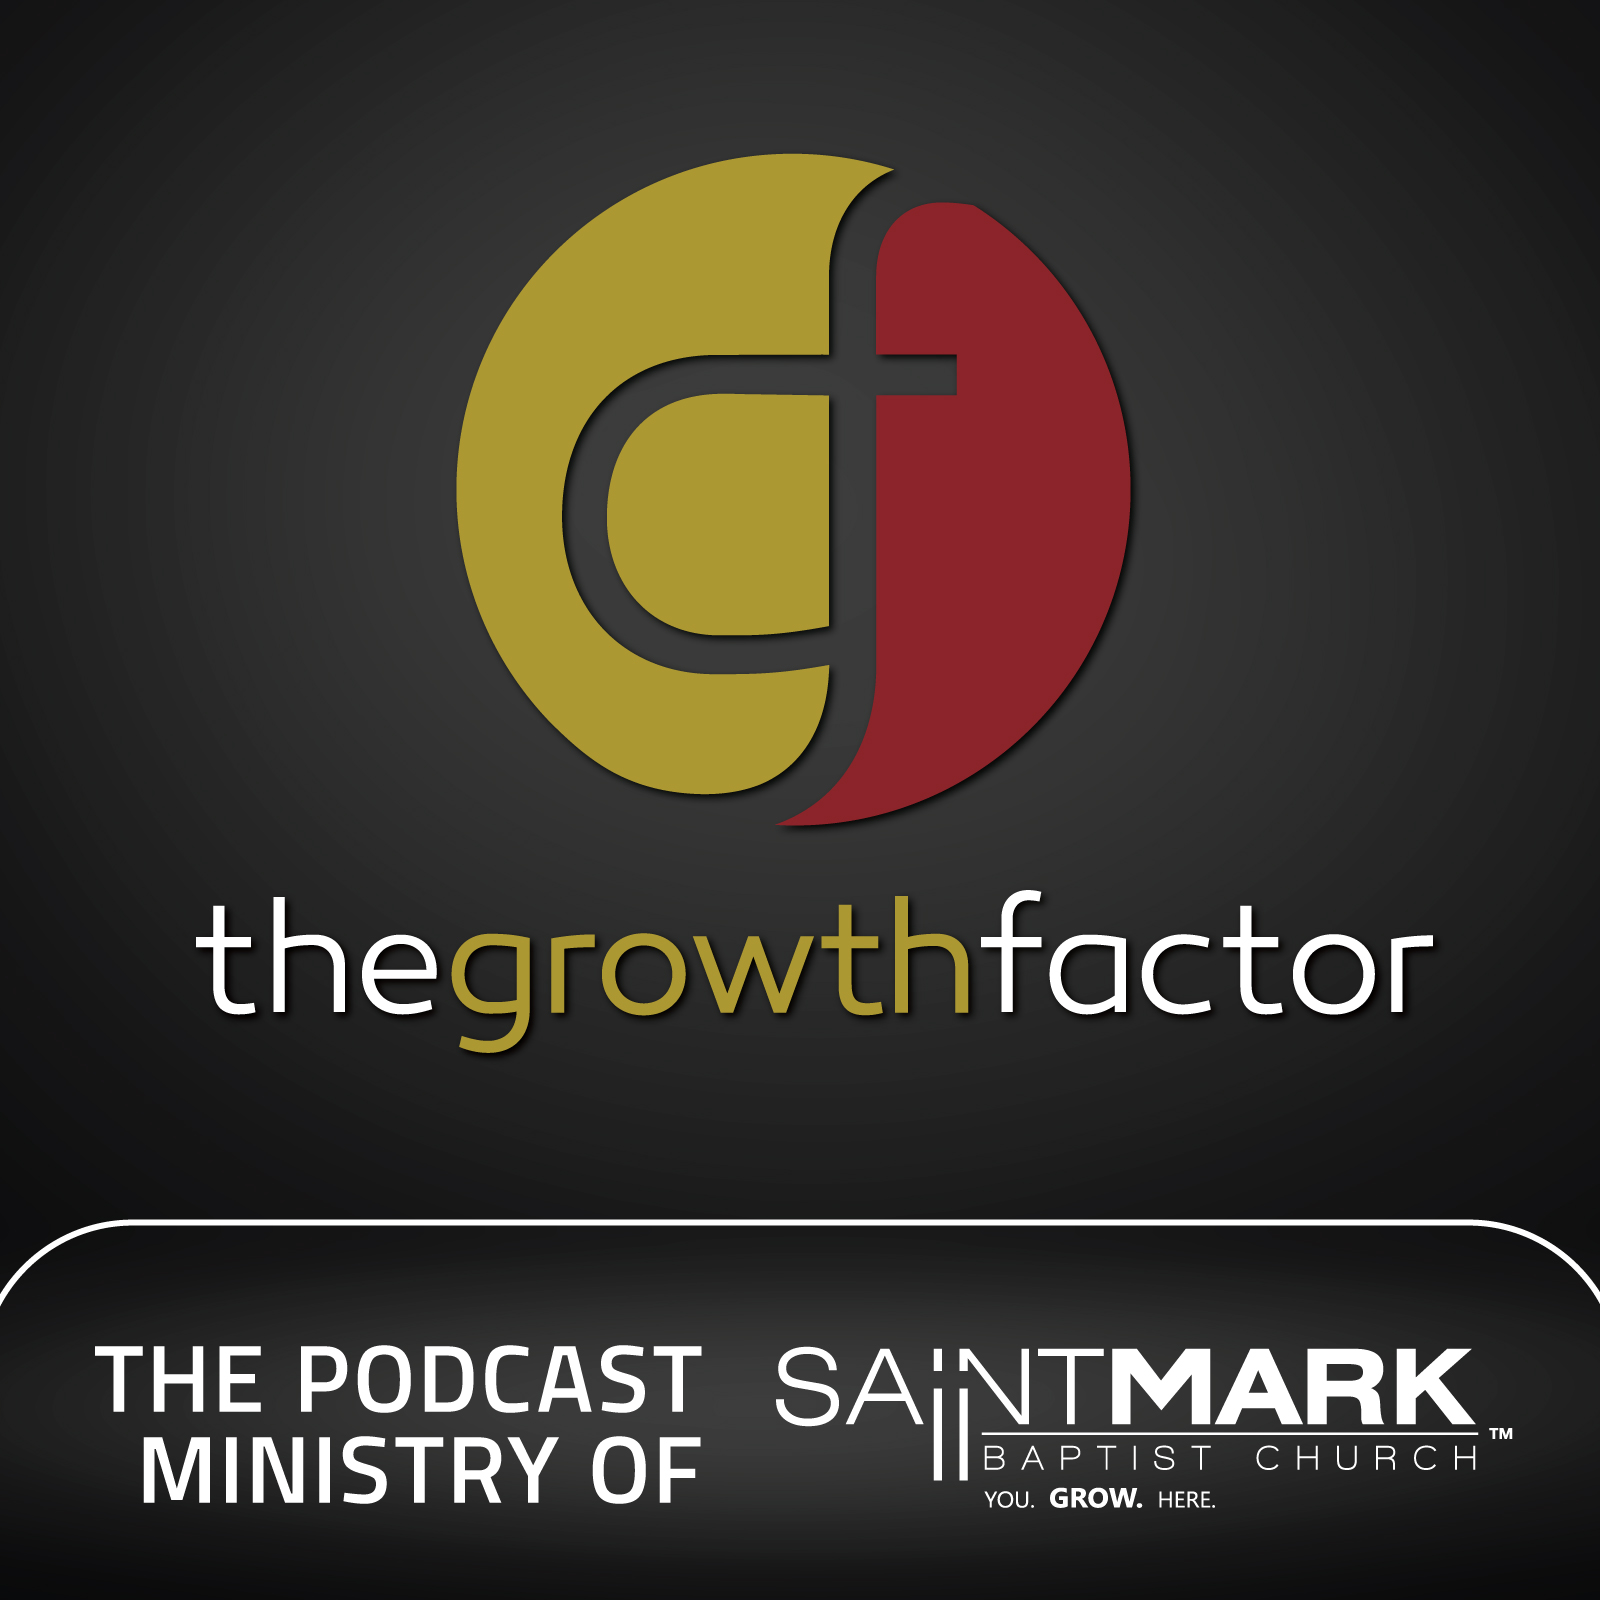 The Growth Factor